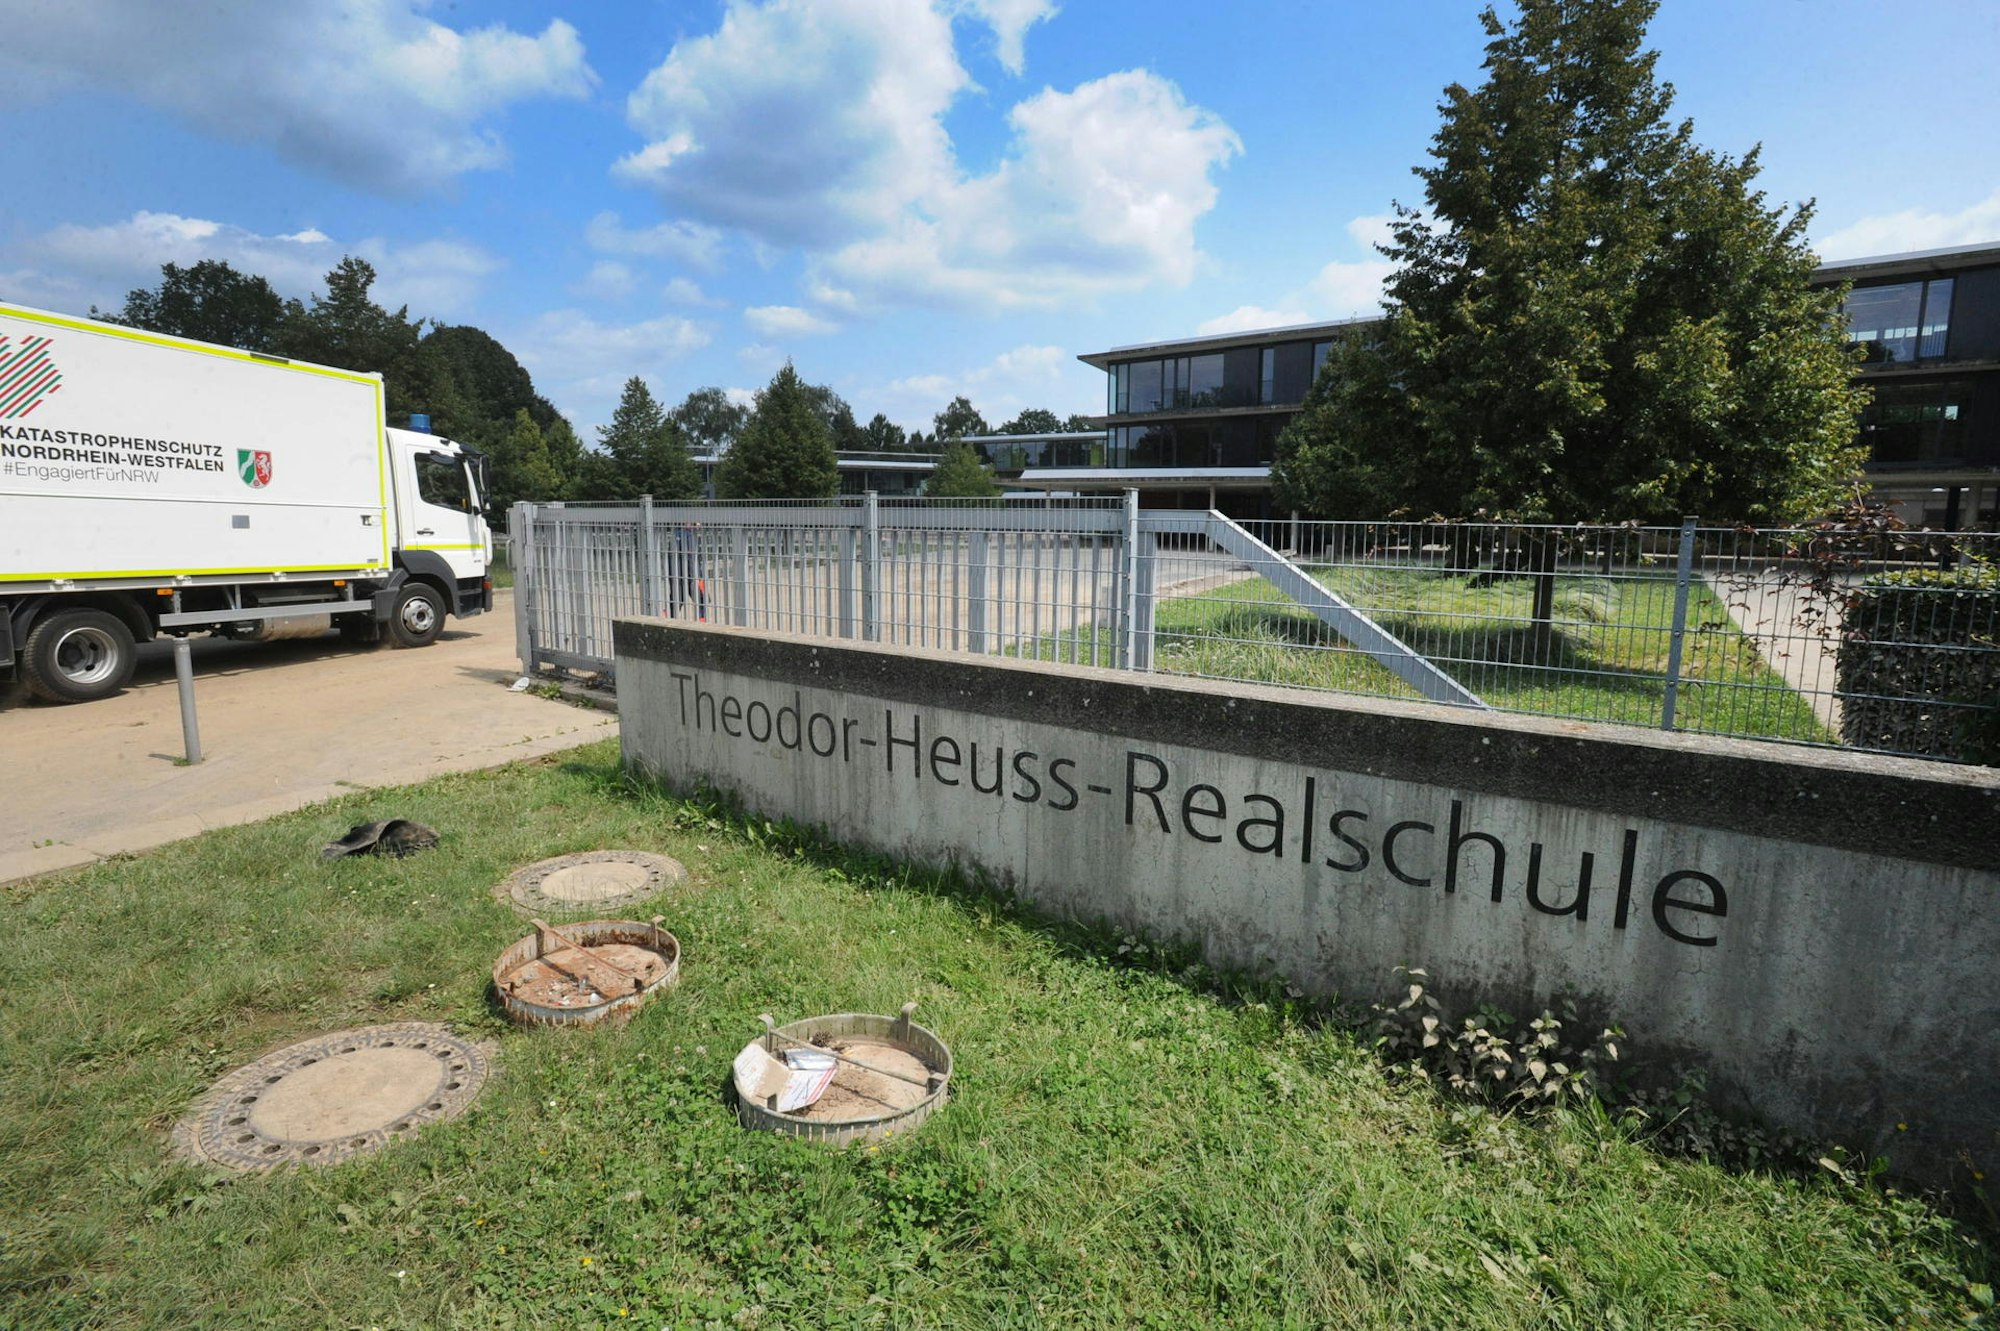 LE_theodor-heuss-realschule_(1)